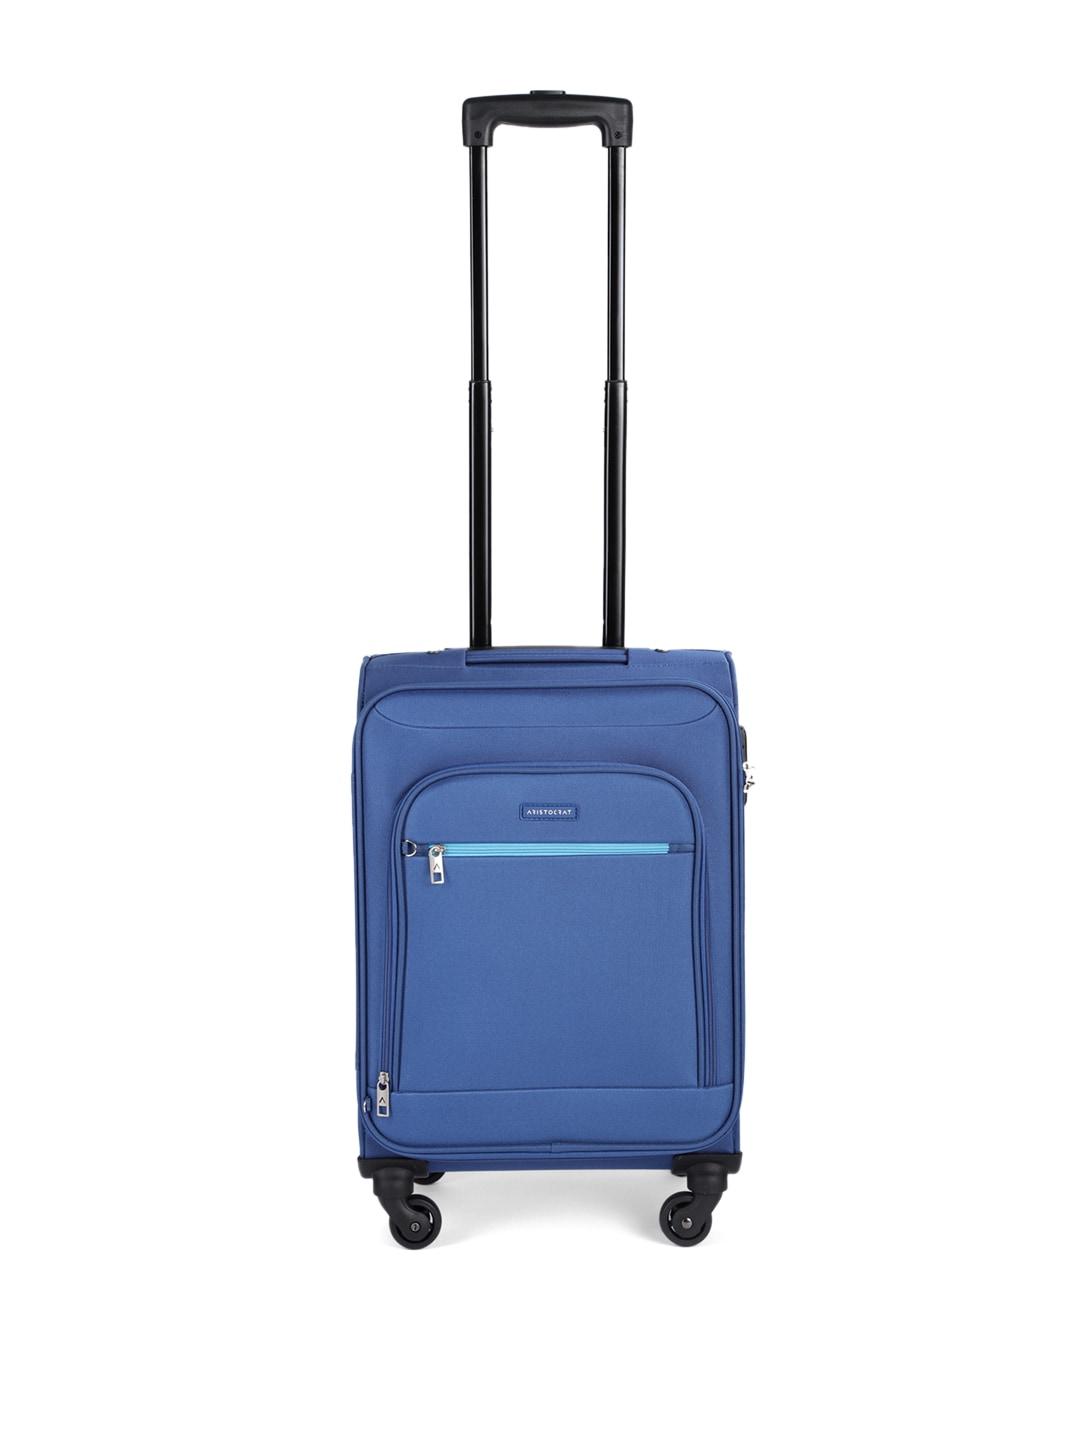 aristocrat unisex bright blue solid nile exp strolly 54 cabin trolley suitcase